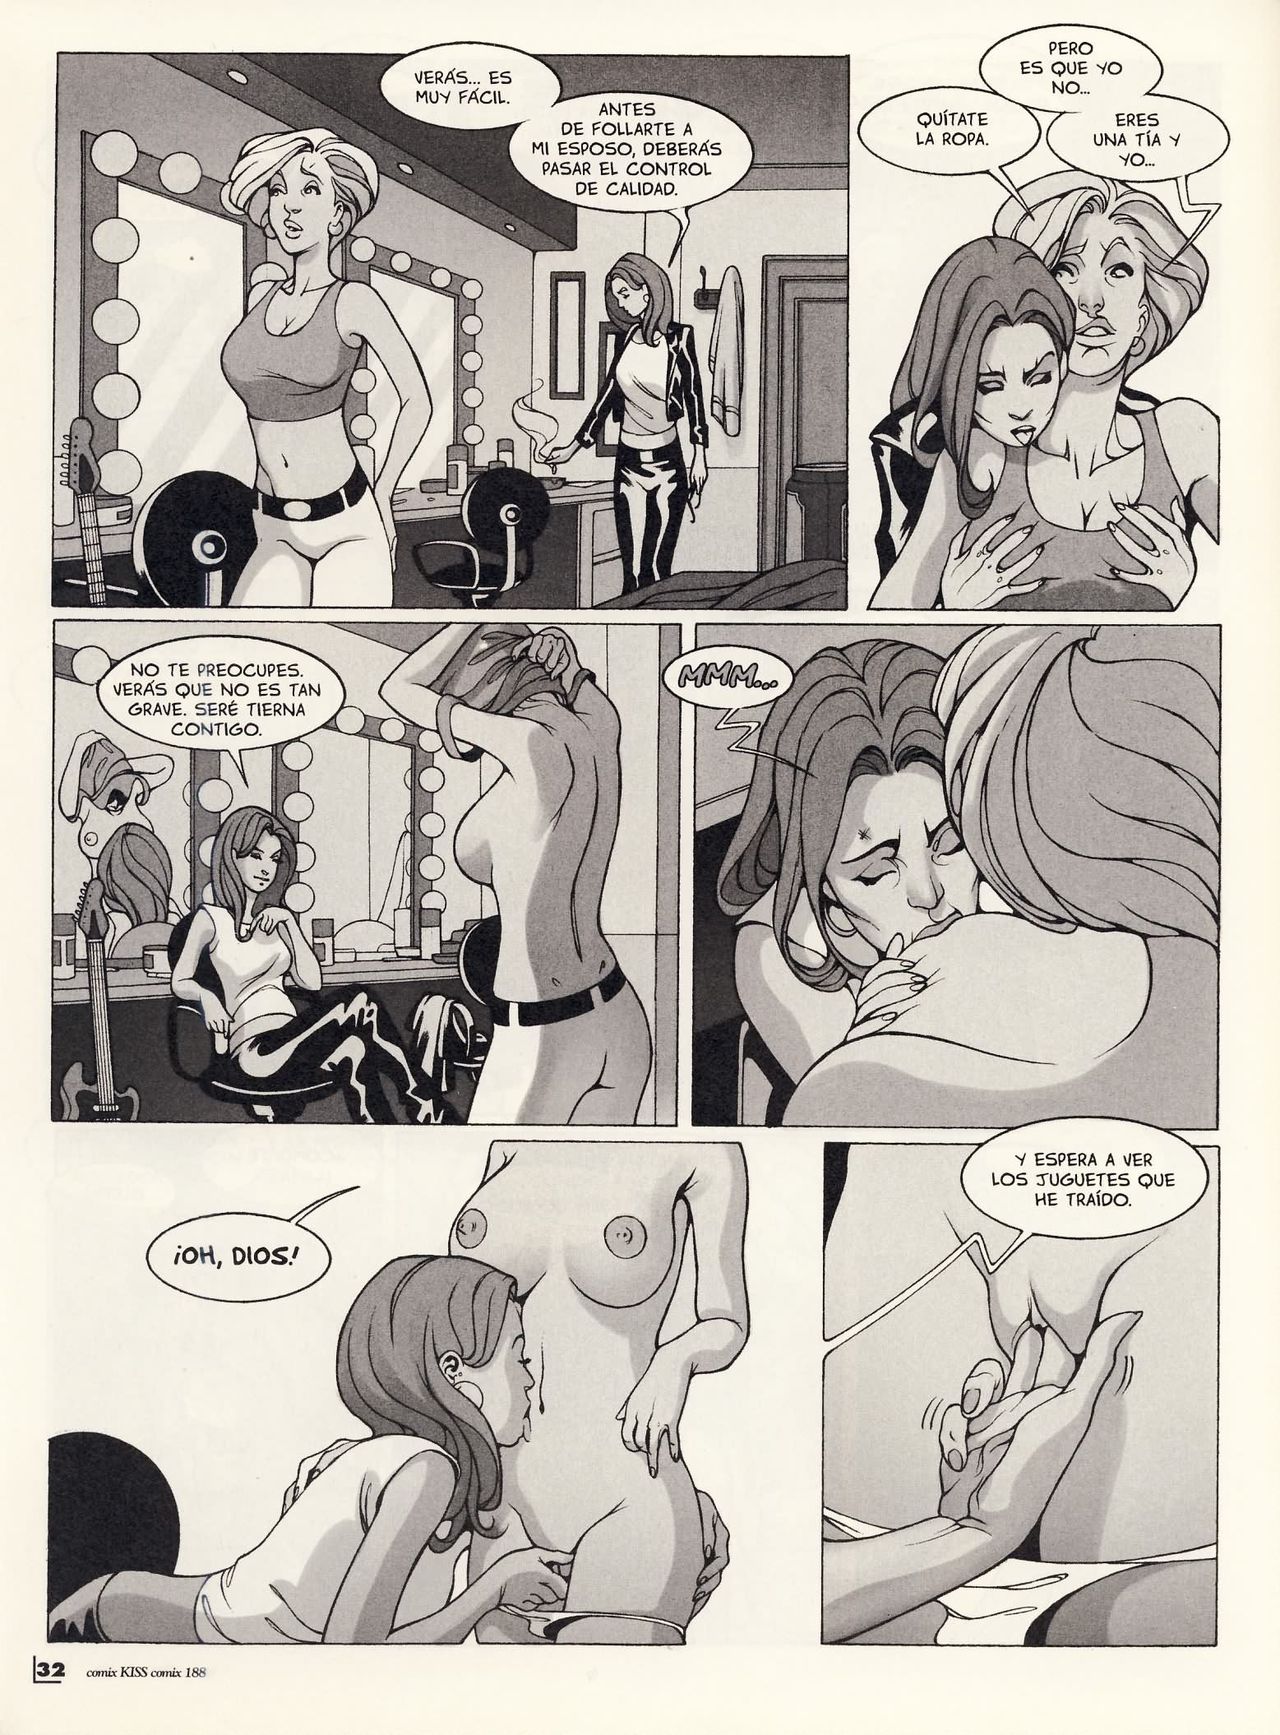 Kiss Comix 188 image number 31